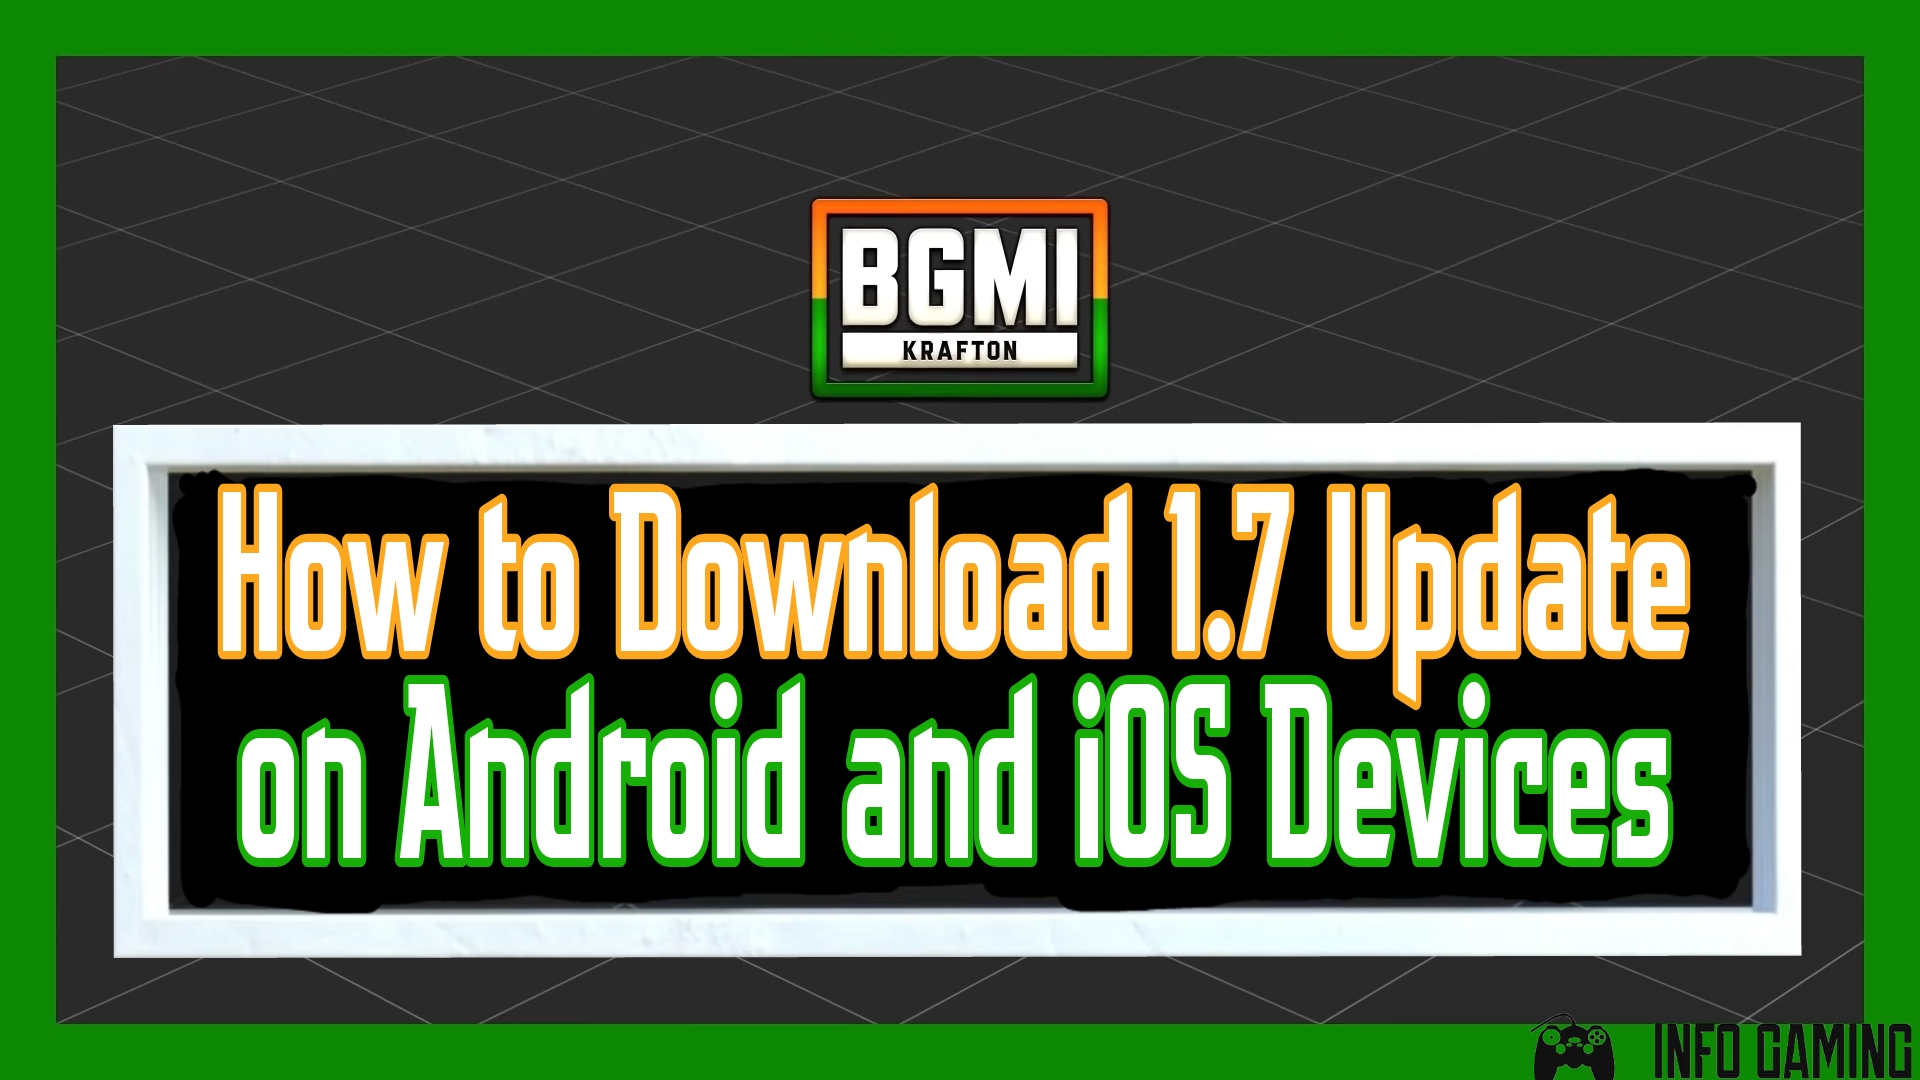 How to download BGMI 1.7 update apk on Android & iOS devices